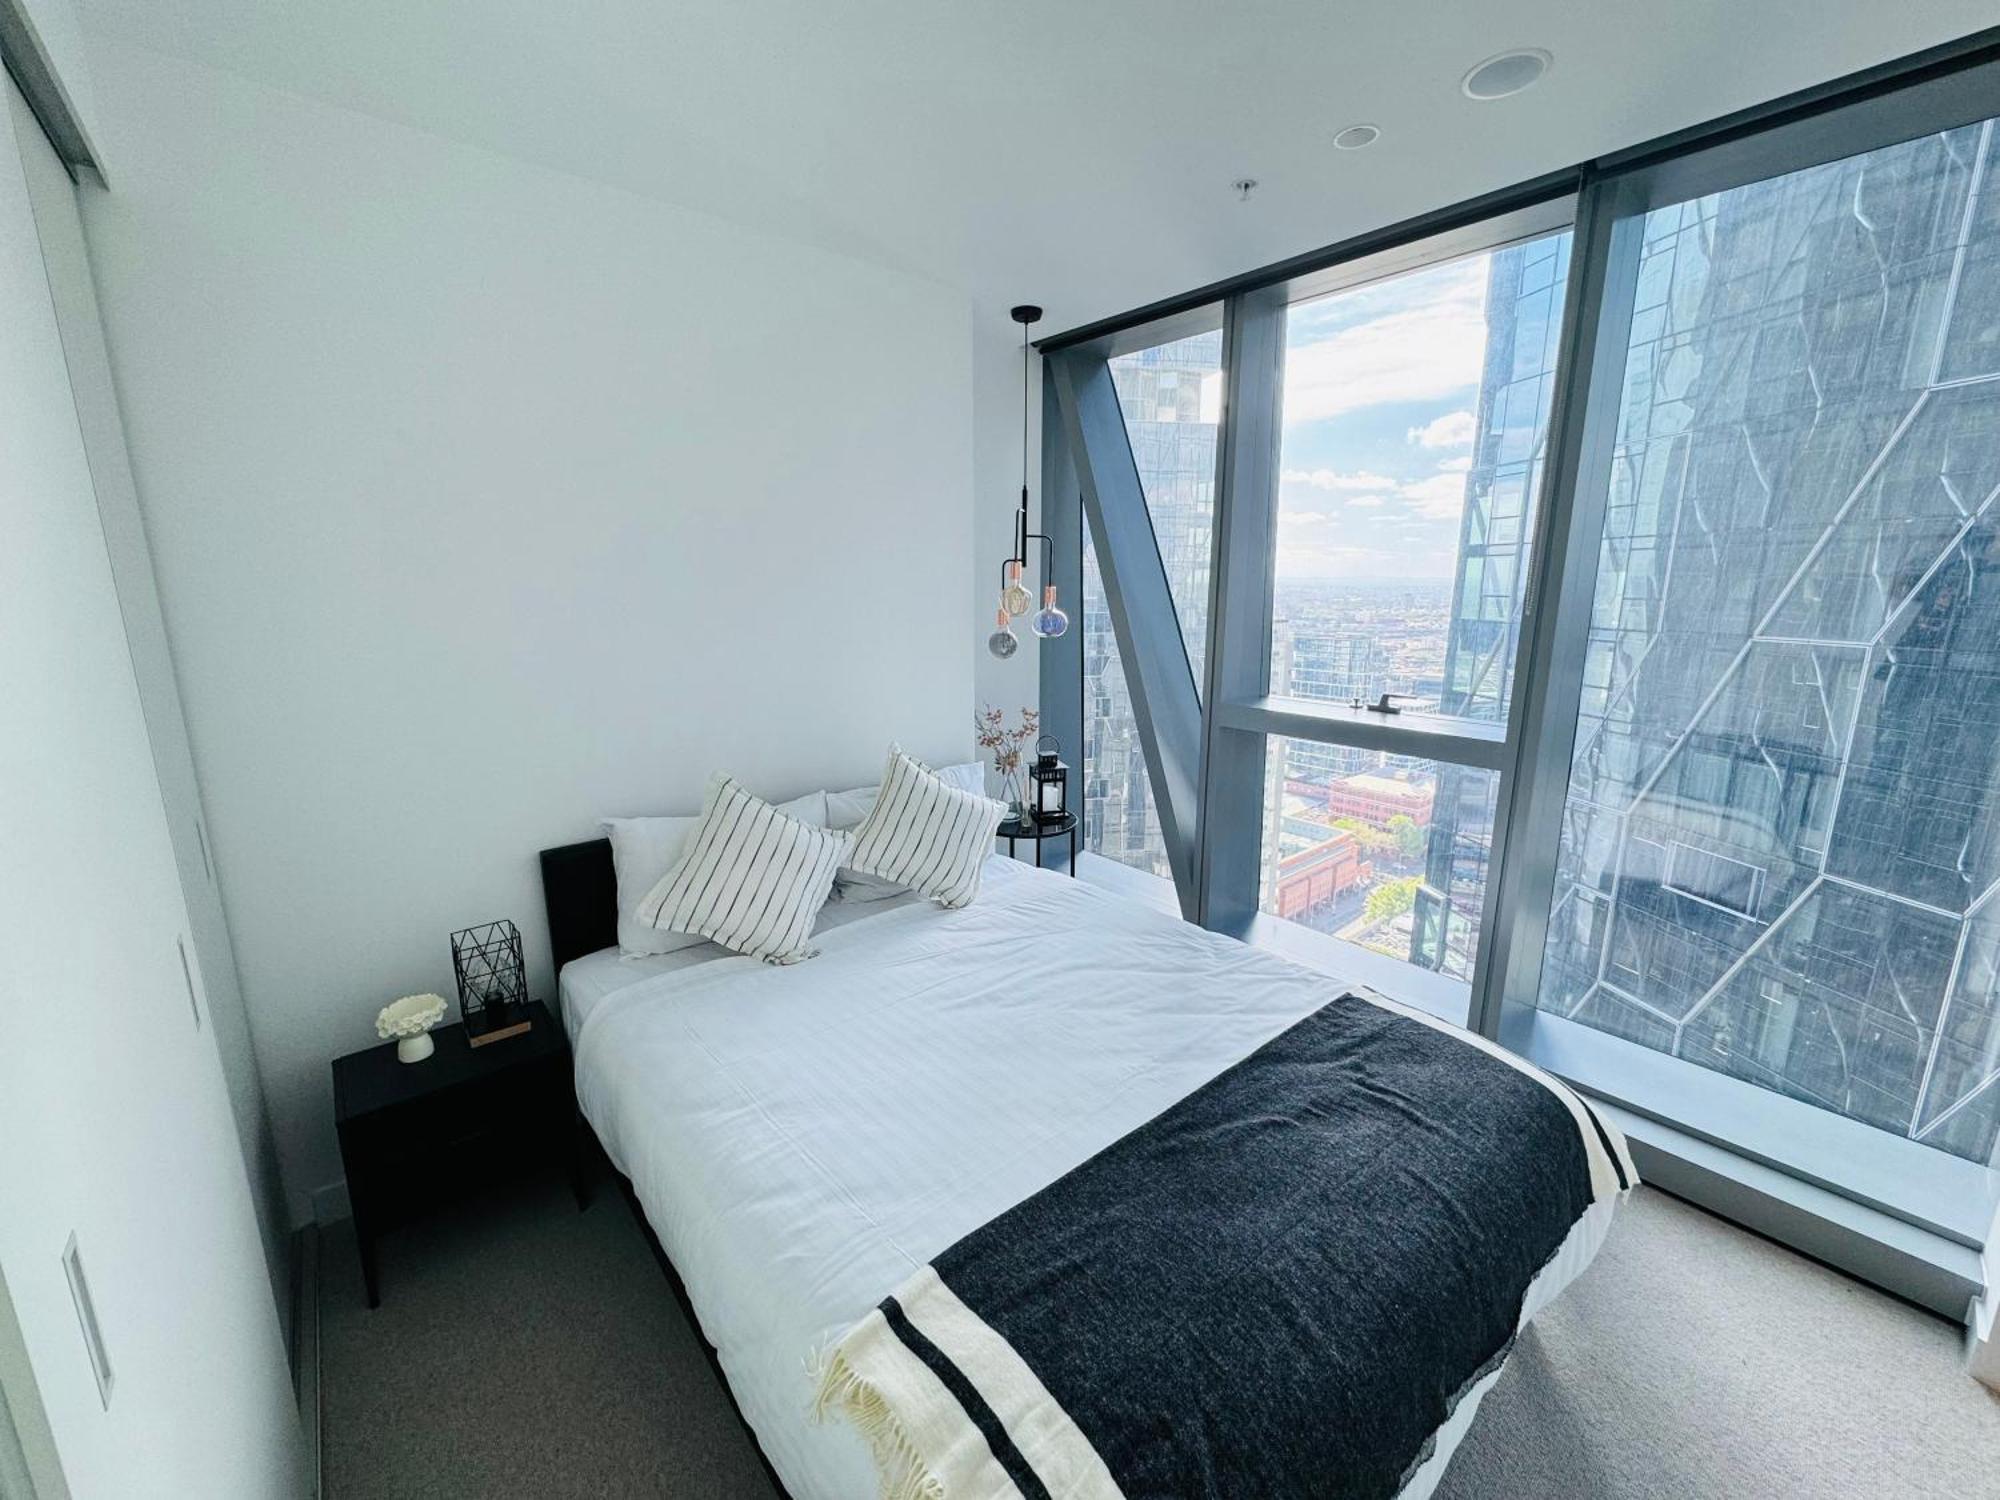 New Retro Style 2Bedrooms Max For 6 In Heart Of Cbd Plus Free Parking Melbourne Bagian luar foto